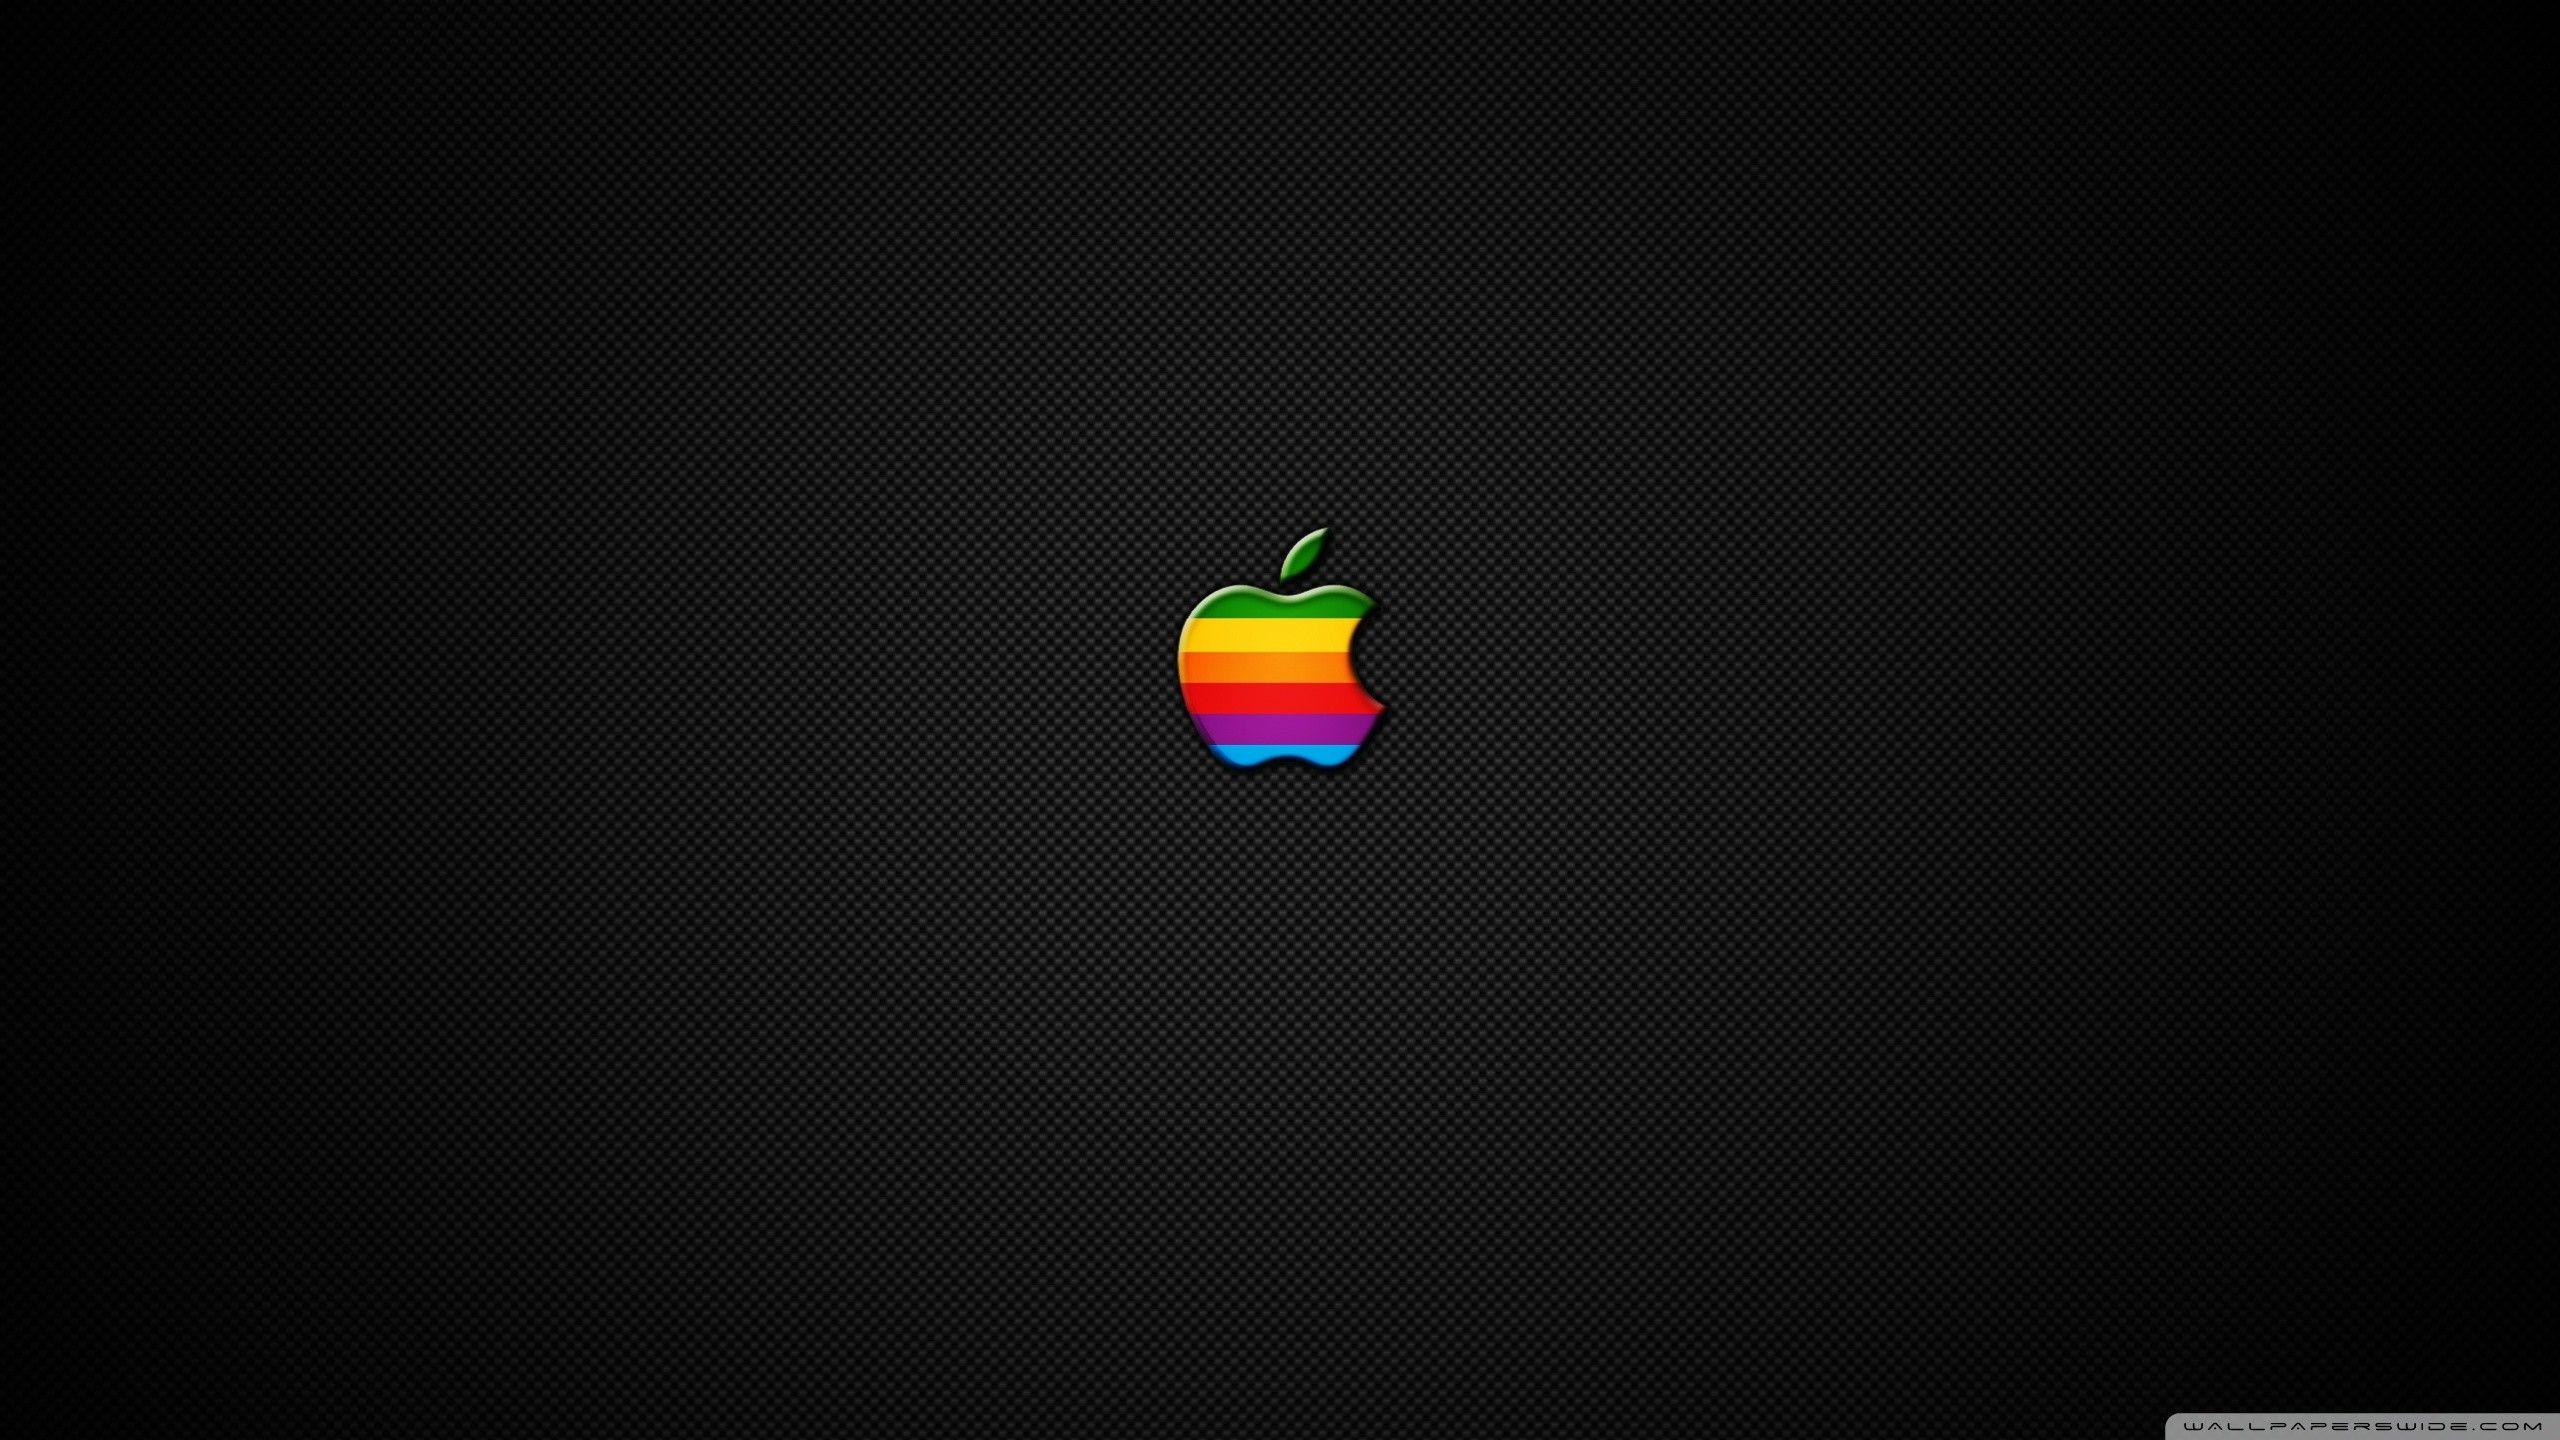 Think Different Wallpapers Top Free Think Different Backgrounds Wallpaperaccess